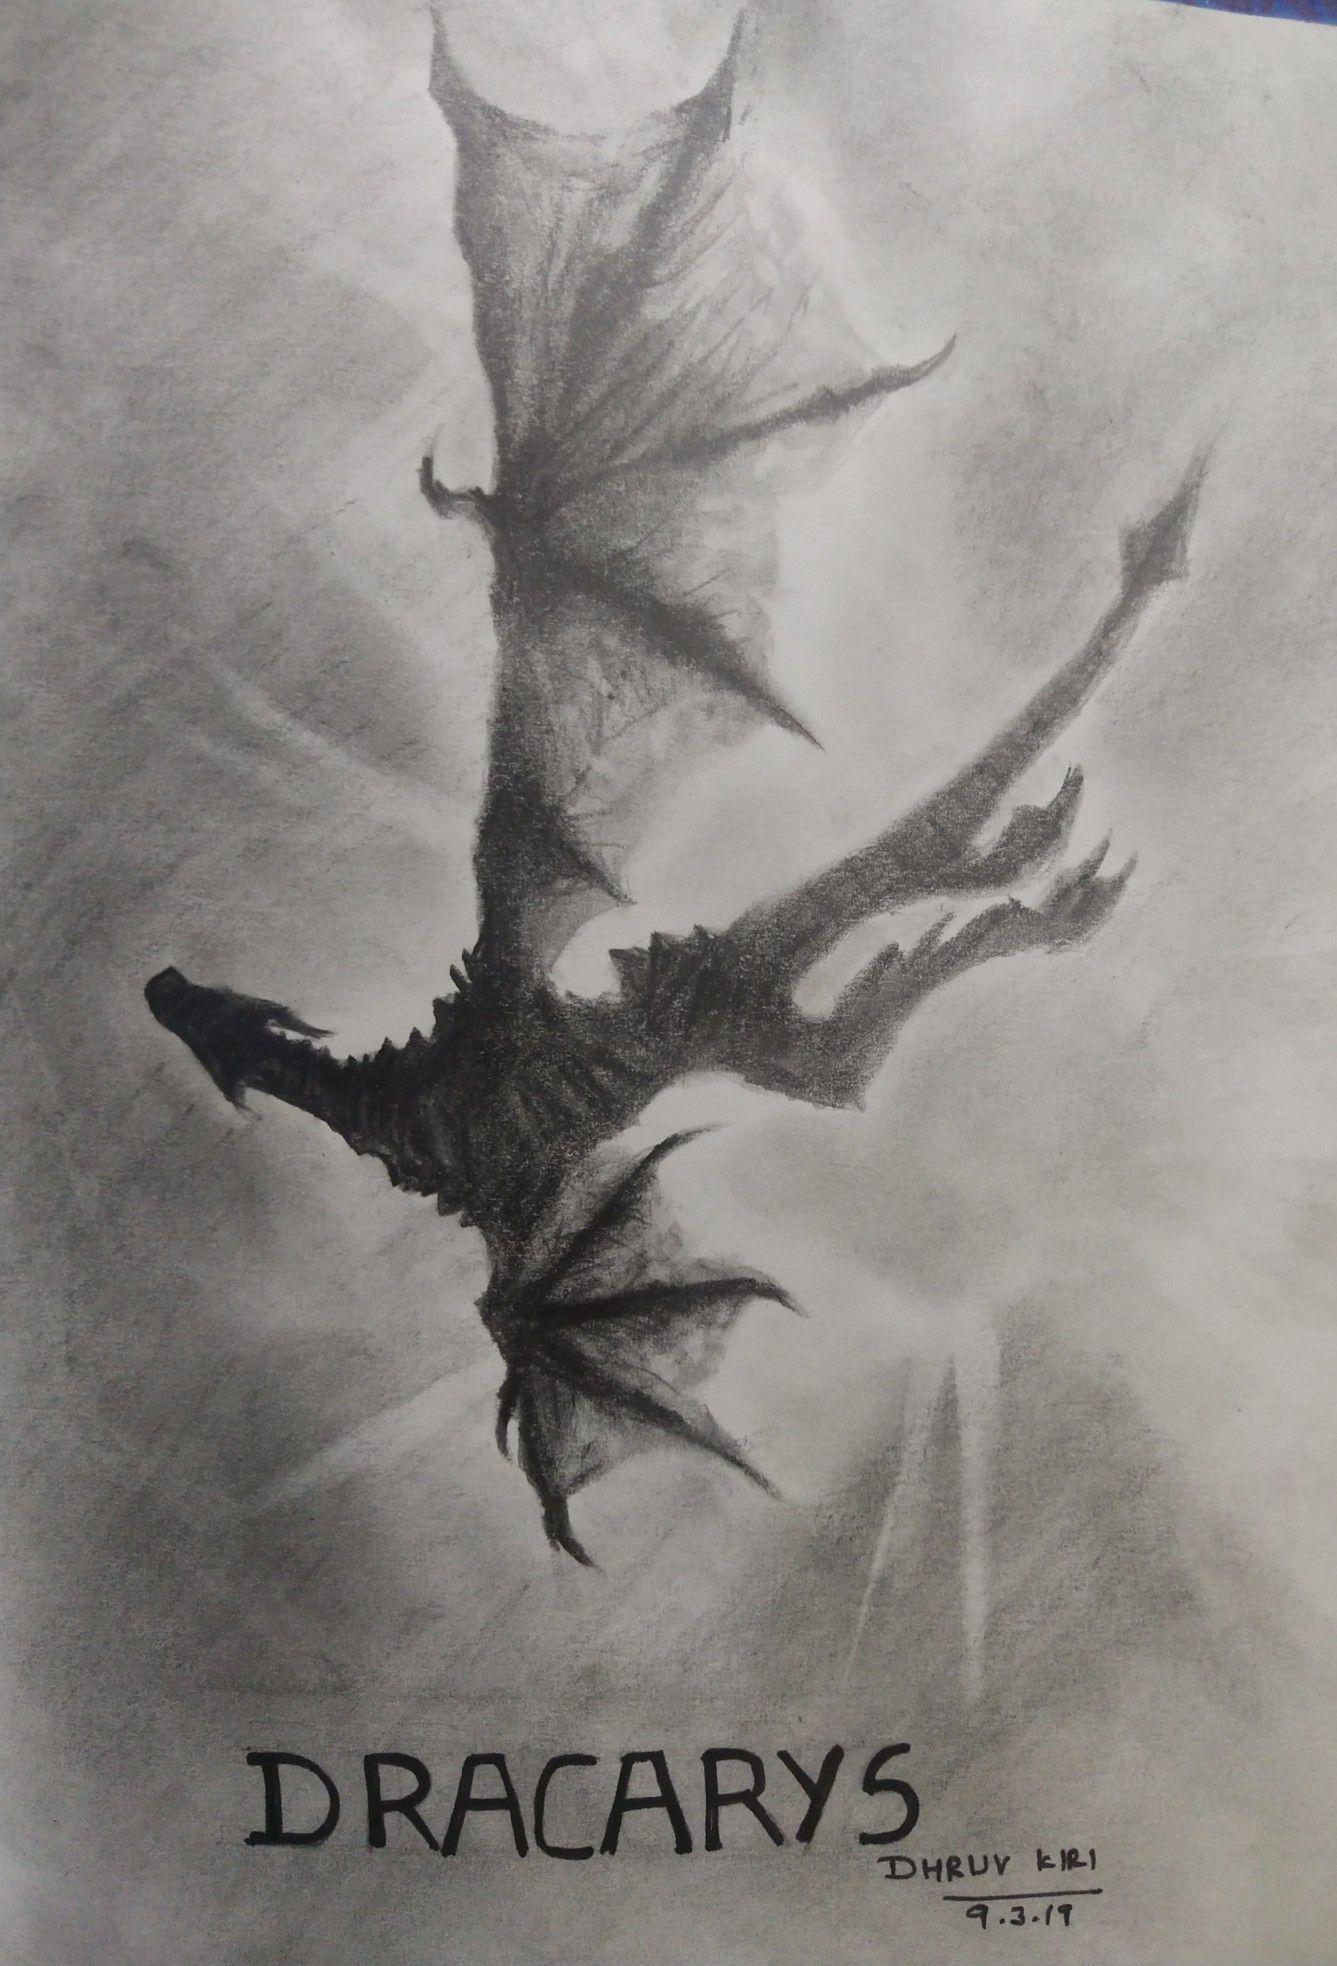 Any Game of throne fan here? Present you the sketch of Dracarys